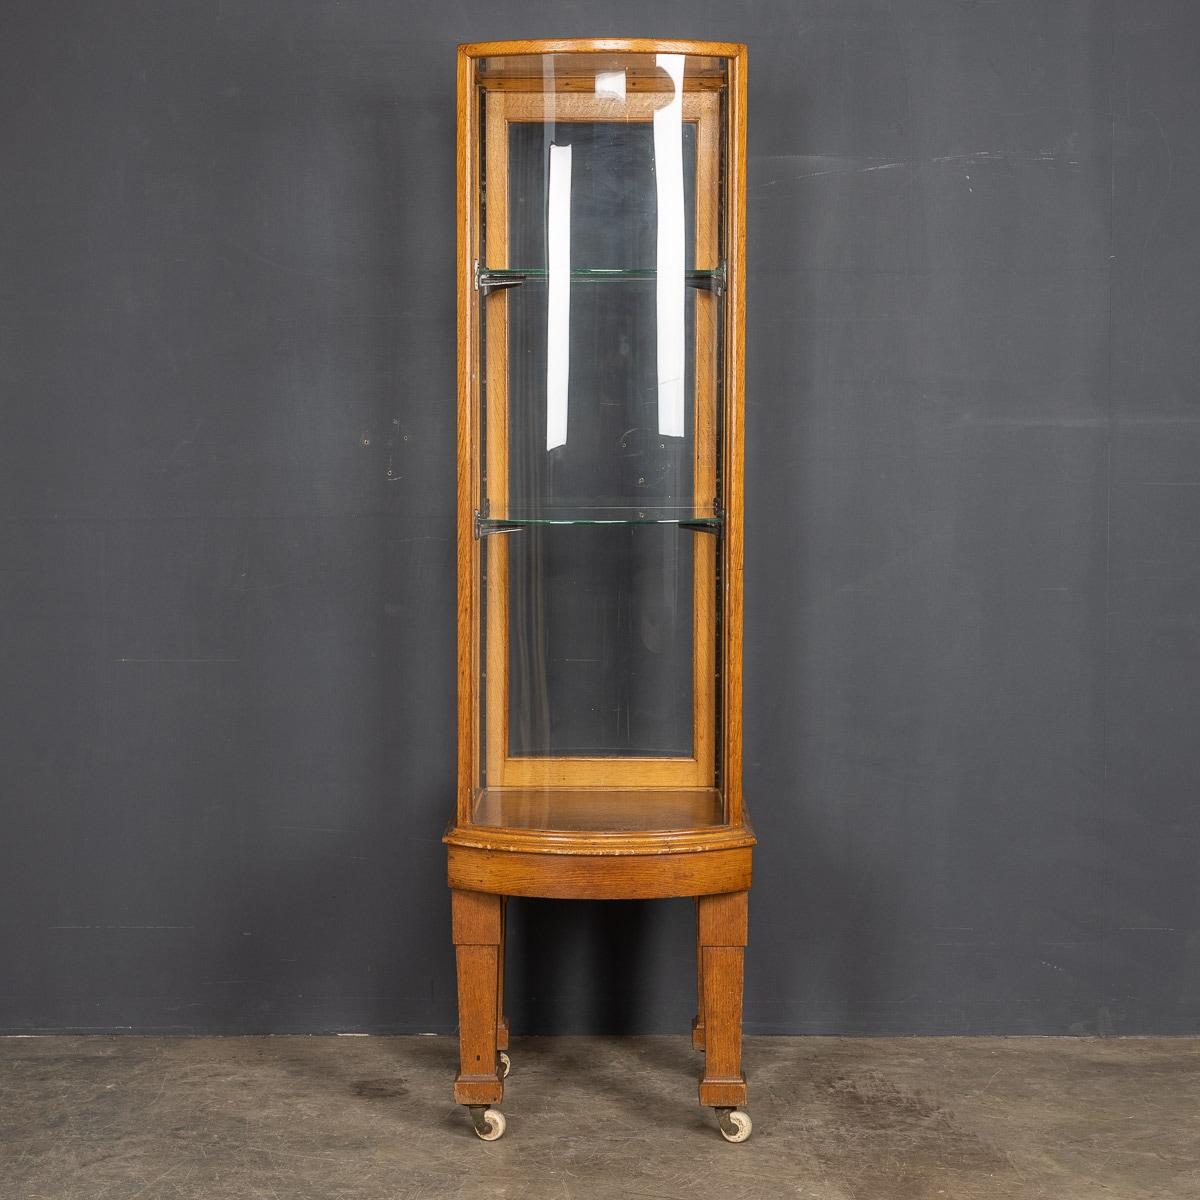 Antique 20th century English Art Deco slender oak and glass display cabinet with two adjustable glass shelves. With a glass bow front and a rear door with original latch, standing on solid square legs ending in original castors, a very practical and